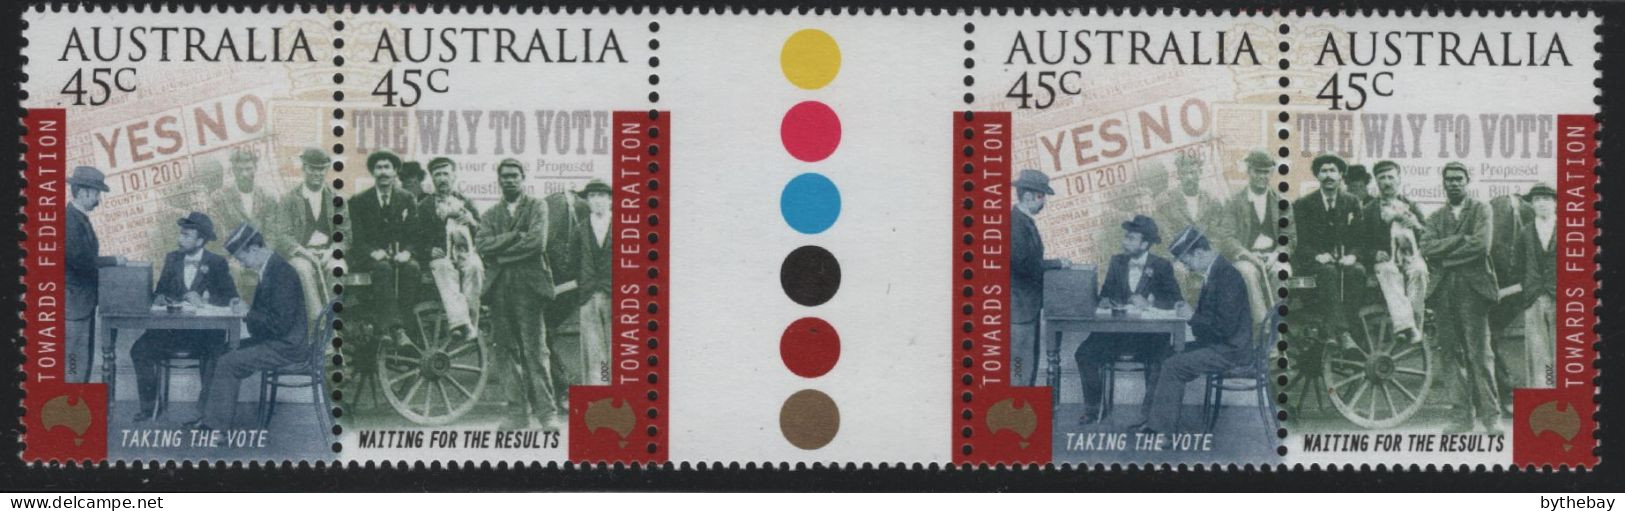 Australia 2000 MNH Sc 1836a 45c Taking The Vote, Waiting For Results Towards Federation Gutter - Ongebruikt